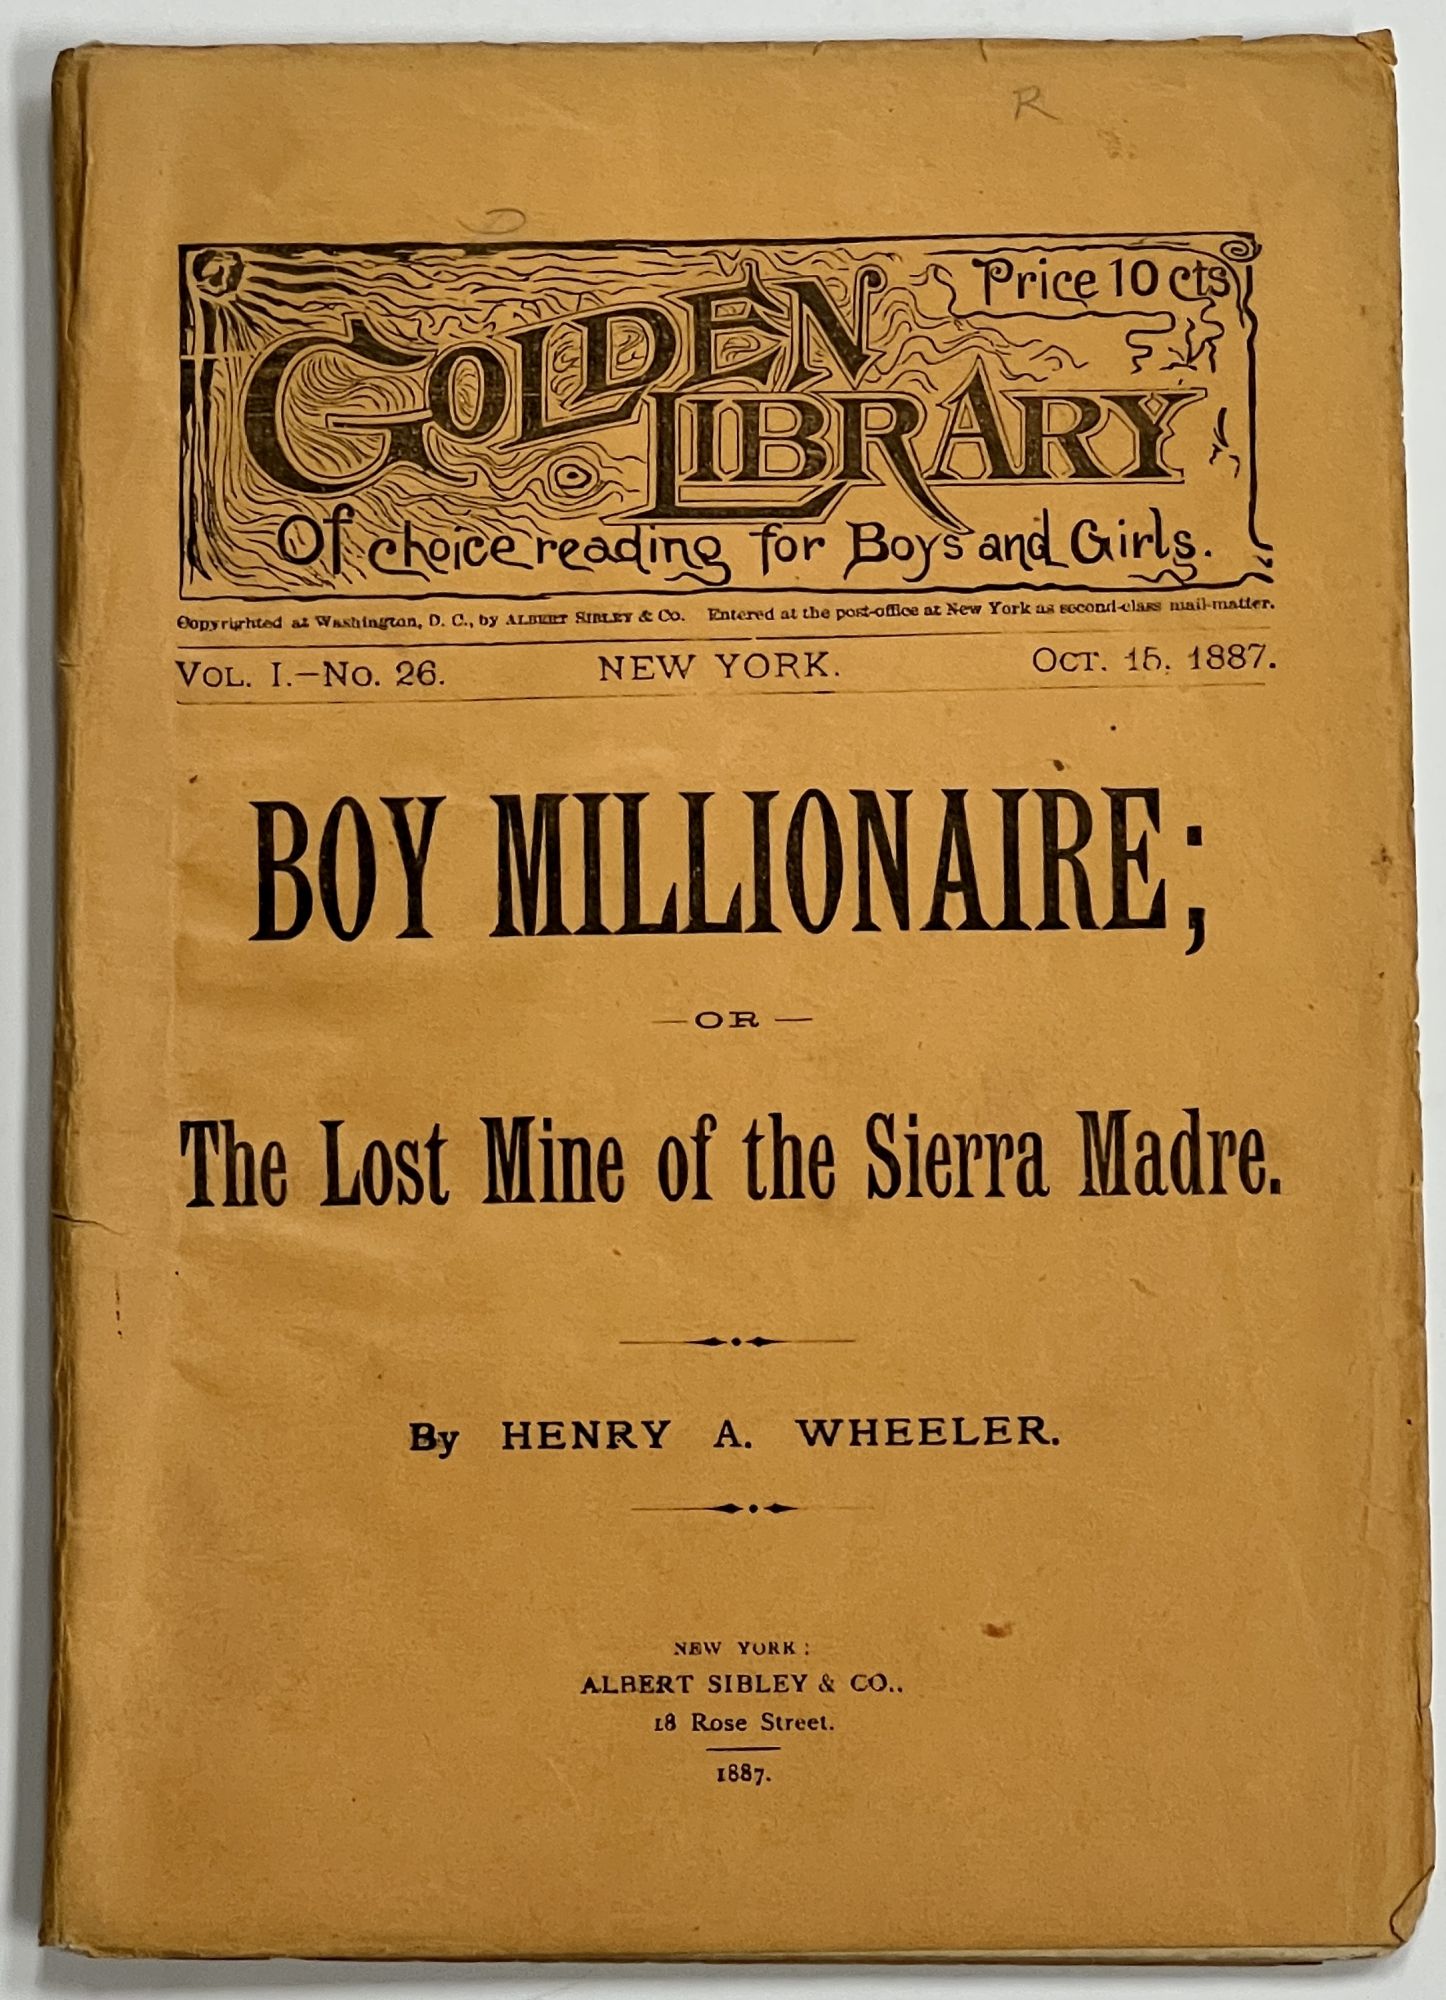 Wheeler, Henry A. Hector, Bertram - Contributor - BOY MILLIONAIRE; or The Lost Mine of the Sierra Madre. Golden Hour Library of Choice Reading for Boys and Girls. Vol. I. - No. 26 Oct. 15, 1887